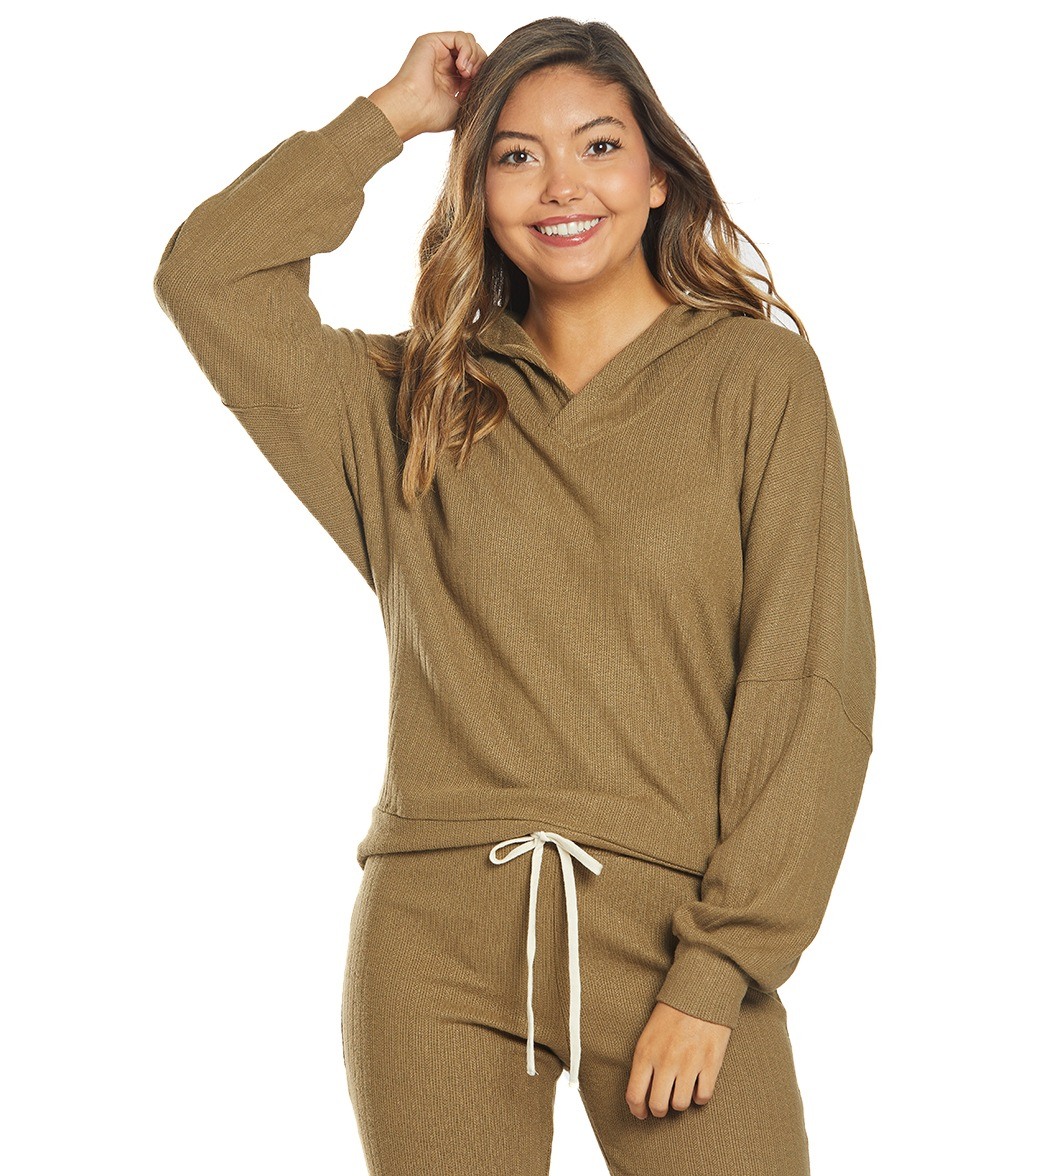 O'neill Tamarack Hooded Pullover - Olive Large - Swimoutlet.com